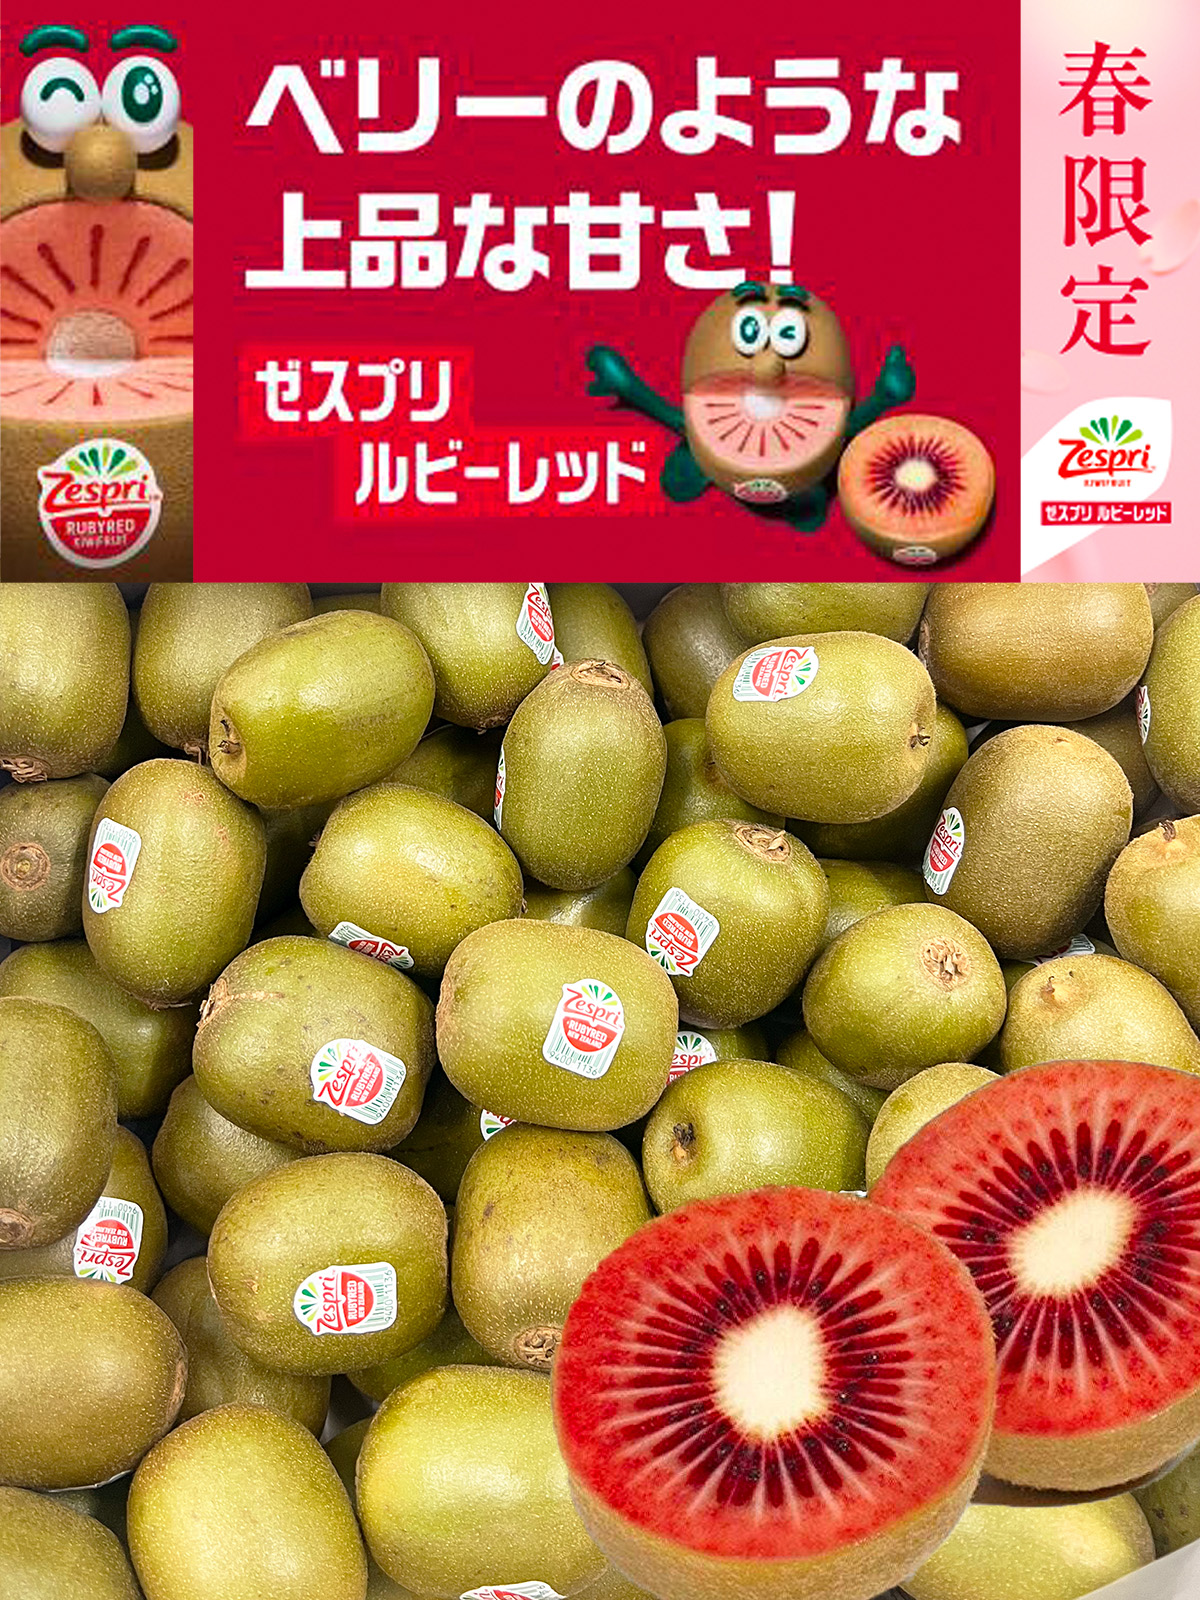 <zespli> ruby red kiwi fruit approximately 2kg 20~30 sphere rom and rear (before and after) New Zealand production red kiwi fruit valuable goods kind elegant .. carefuly selected fruit . unusual . Mother's Day spring limitation < safe domestic inspection goods >